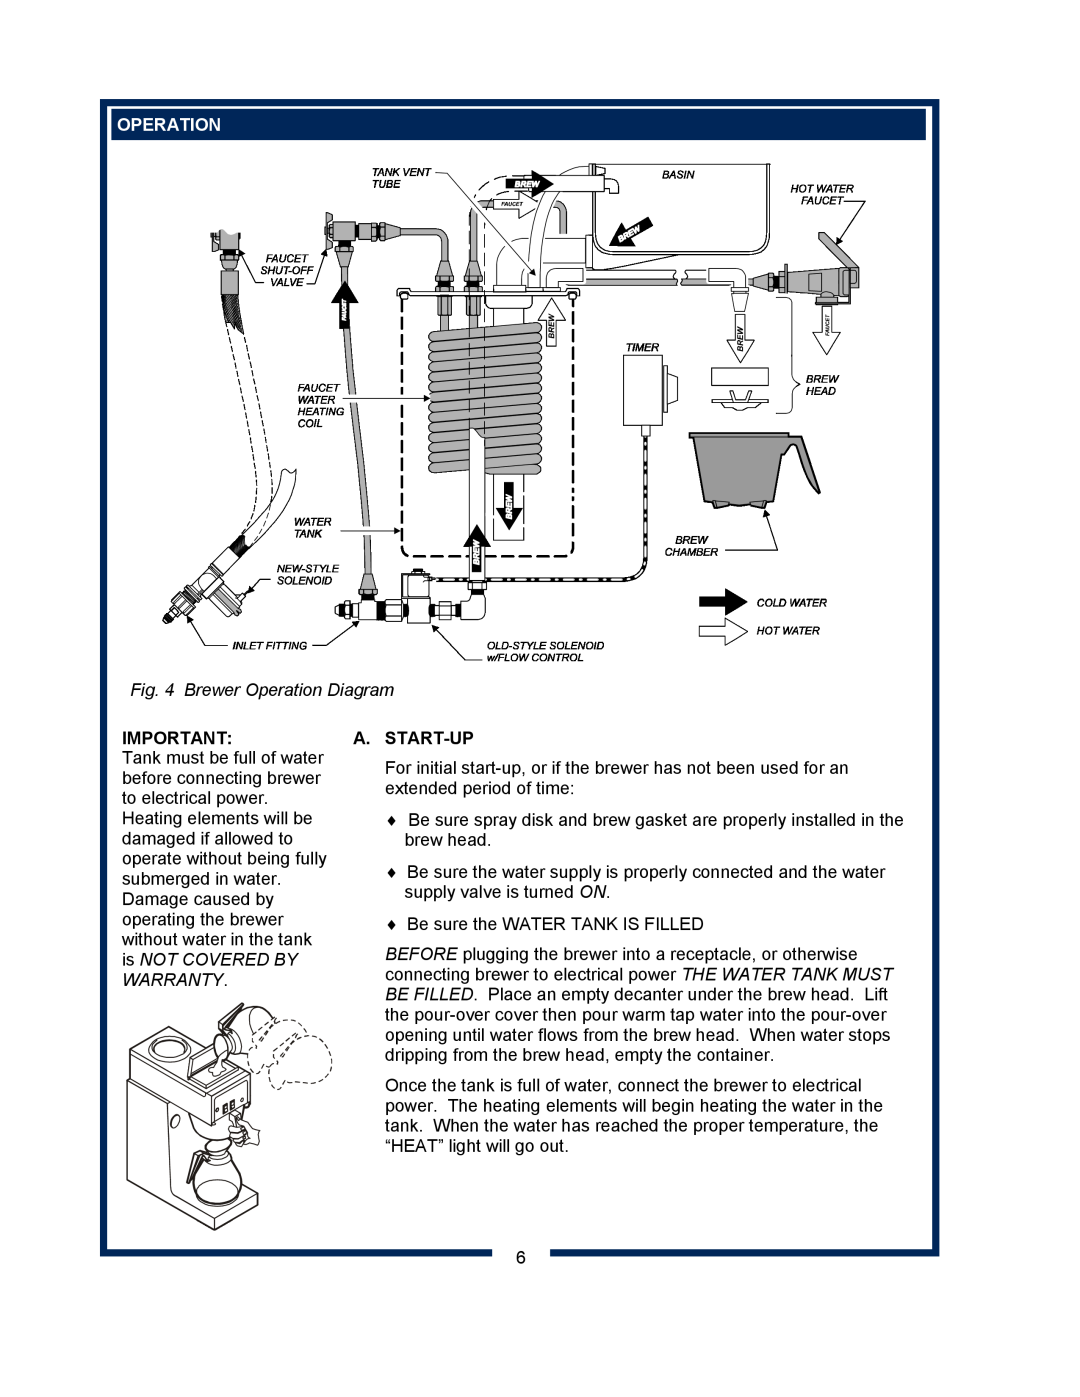 Bloomfield 8540, 8541, 8542, 8573, 8543, 8571, 8572, 8574 owner manual Brewer Operation Diagram, A. Start-Up 